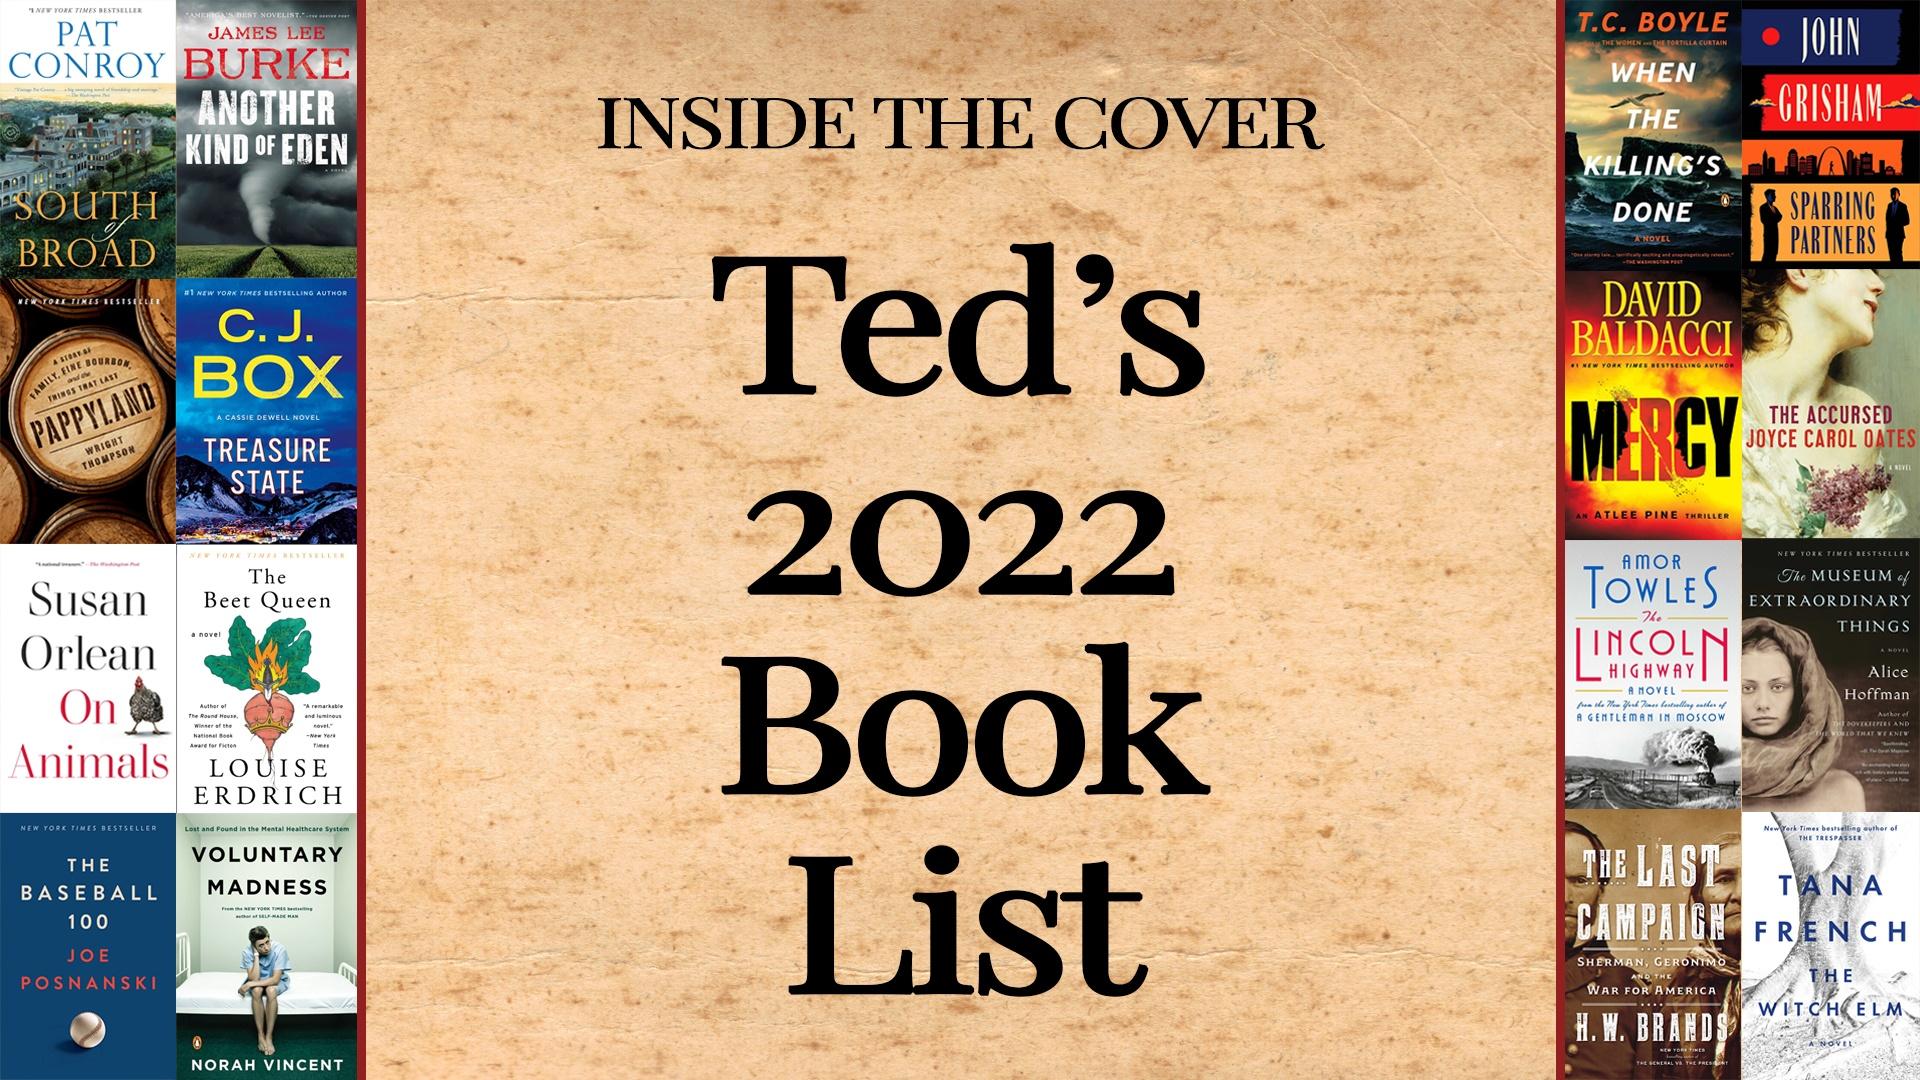 Ted's 2022 Book List